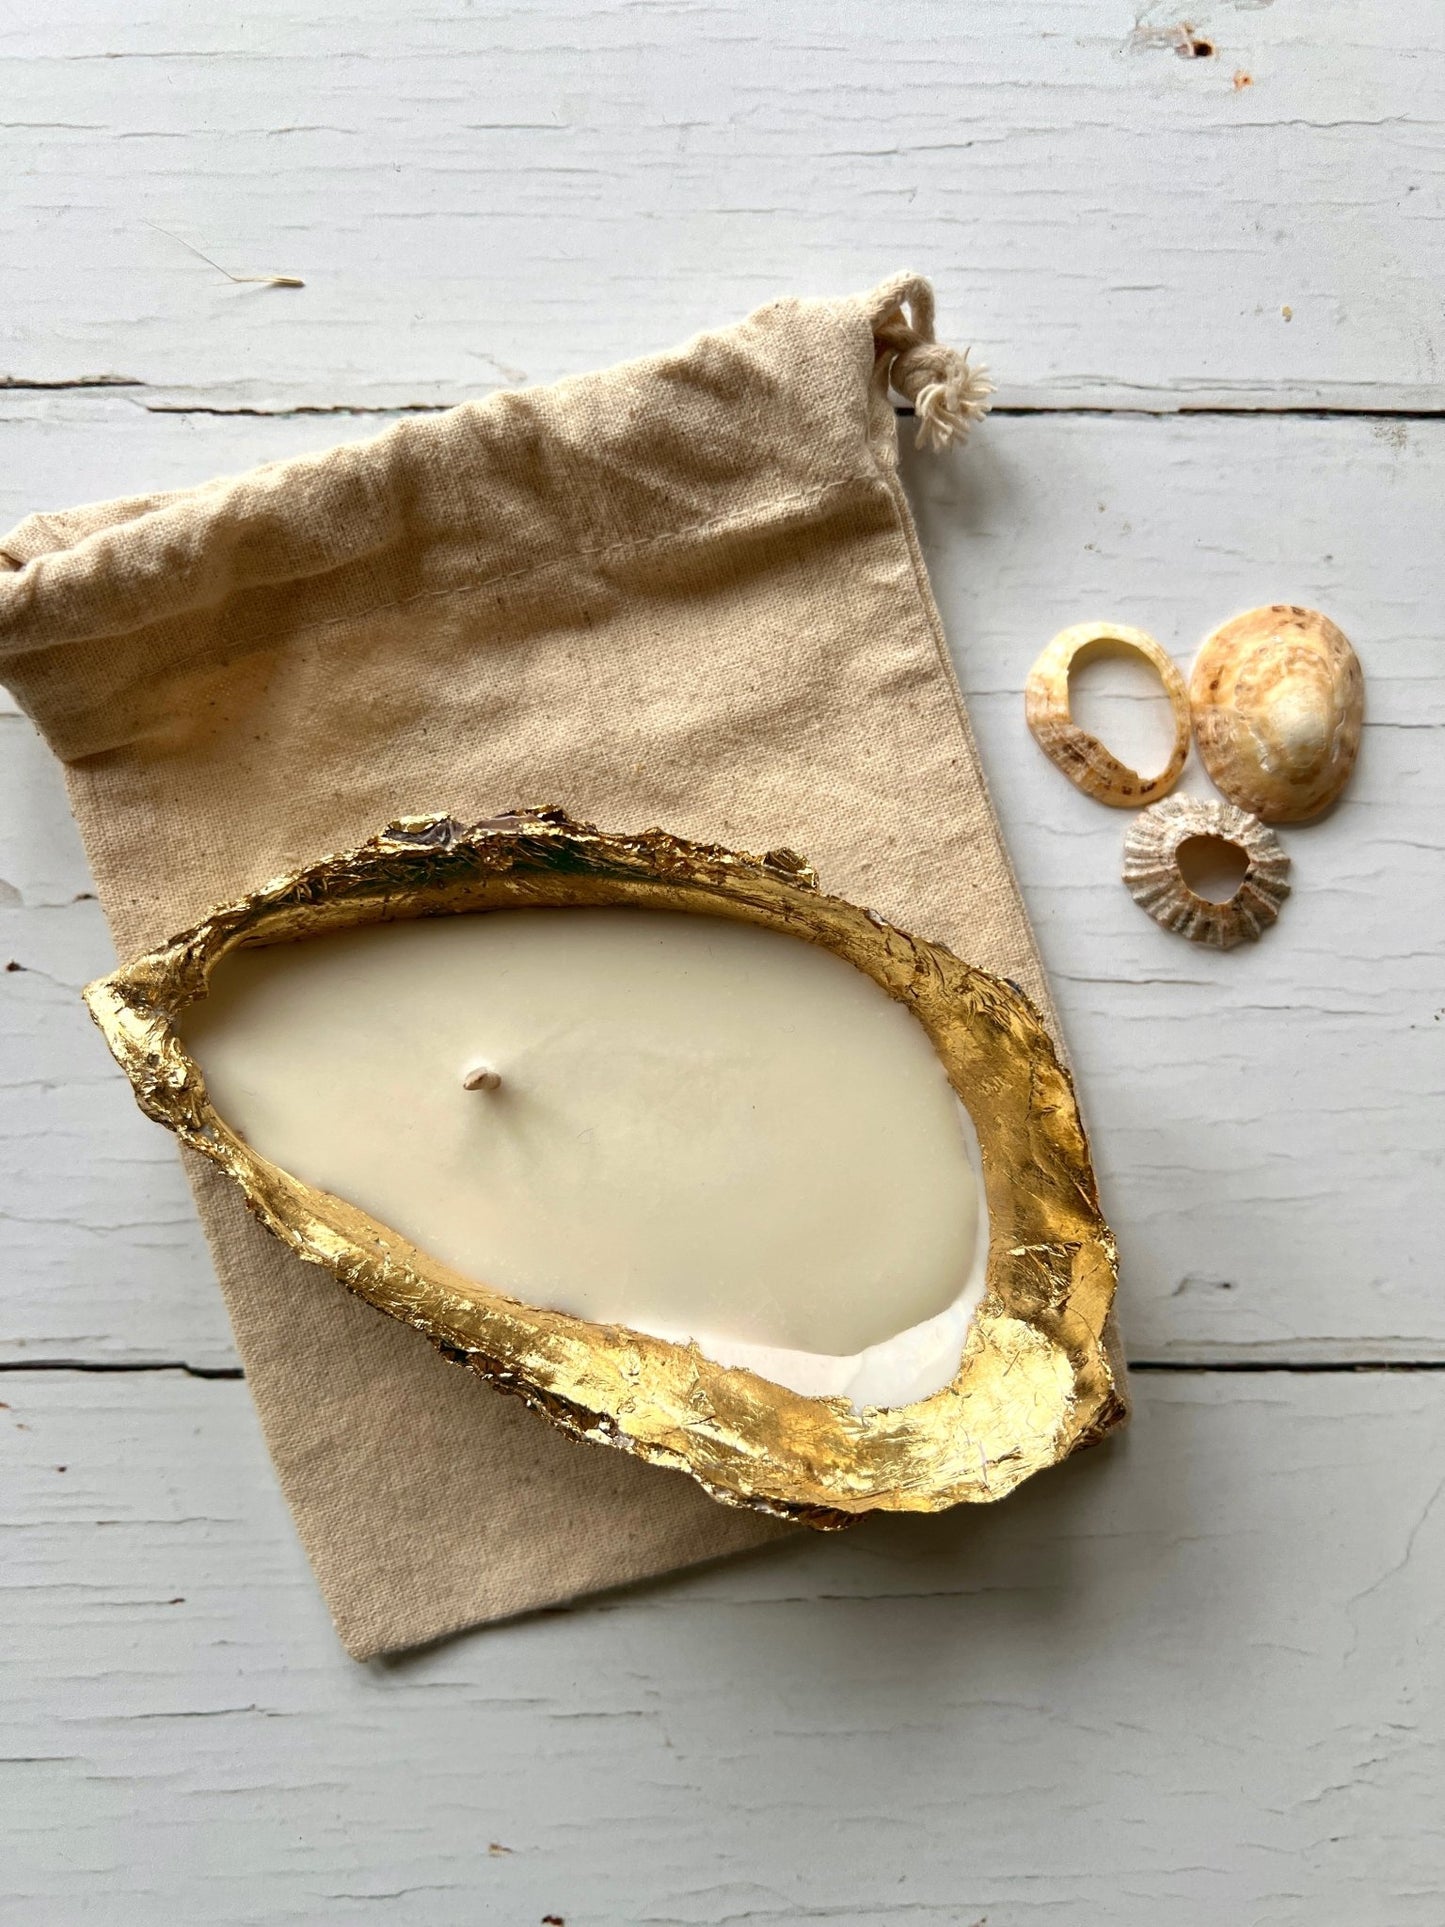 Gilded Oyster Shell Candle with Vegan Soy & Coconut Wax - Readymoney Beach Shop